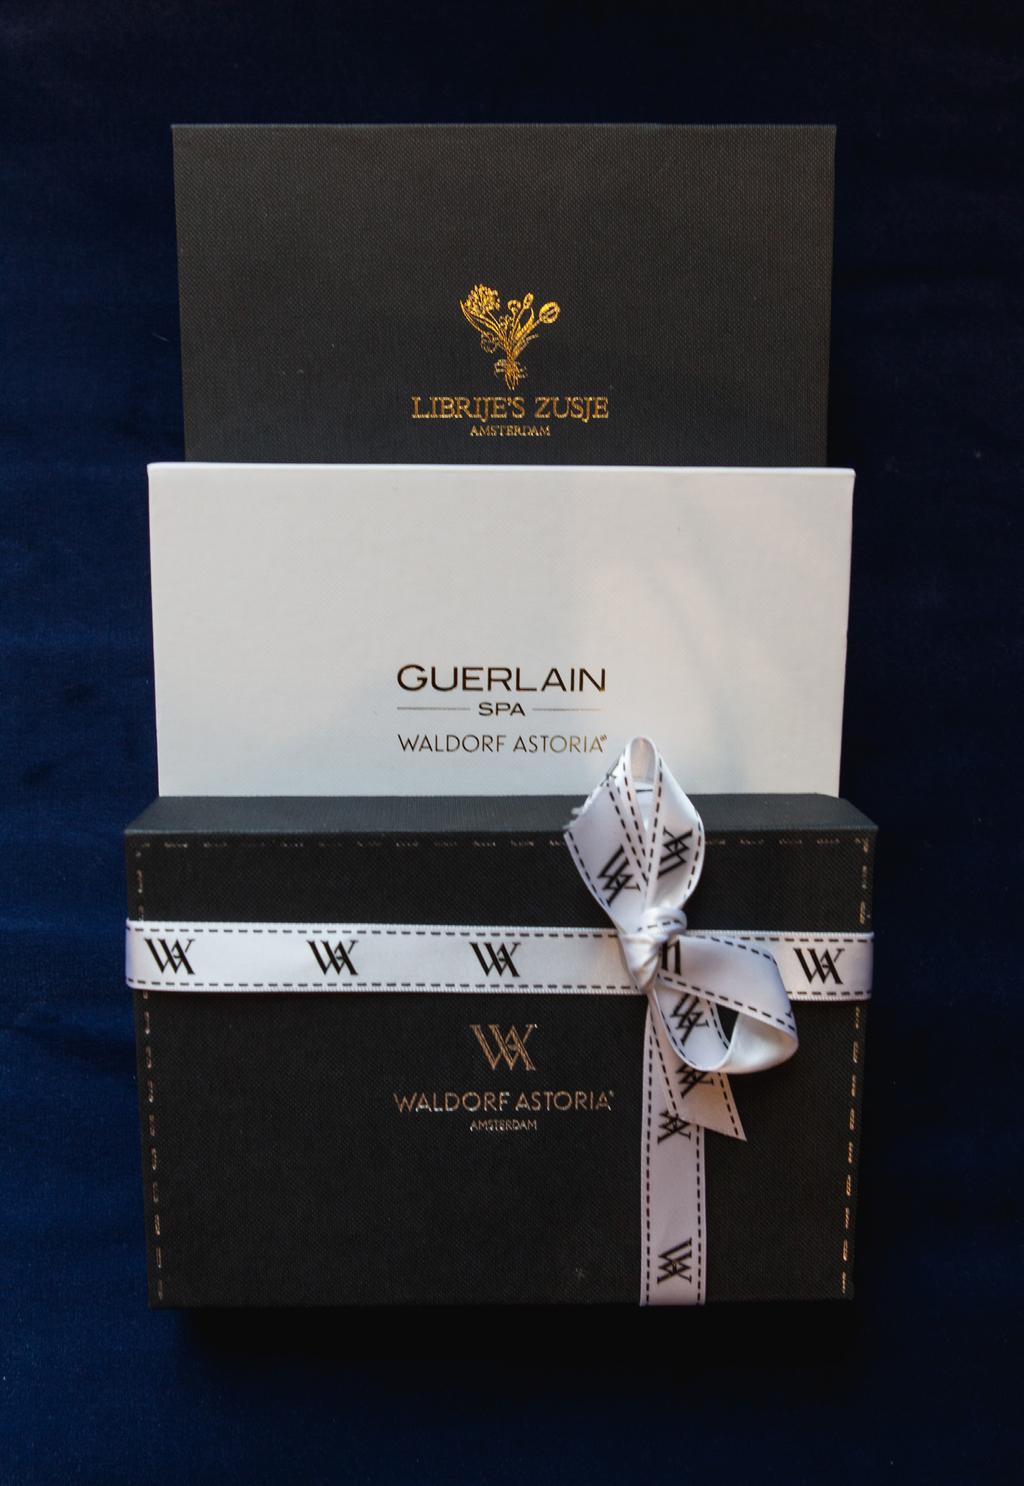 Surprise your loved one with a gift voucher and celebrate Valentine's Day any day at Waldorf Astoria Amsterdam.